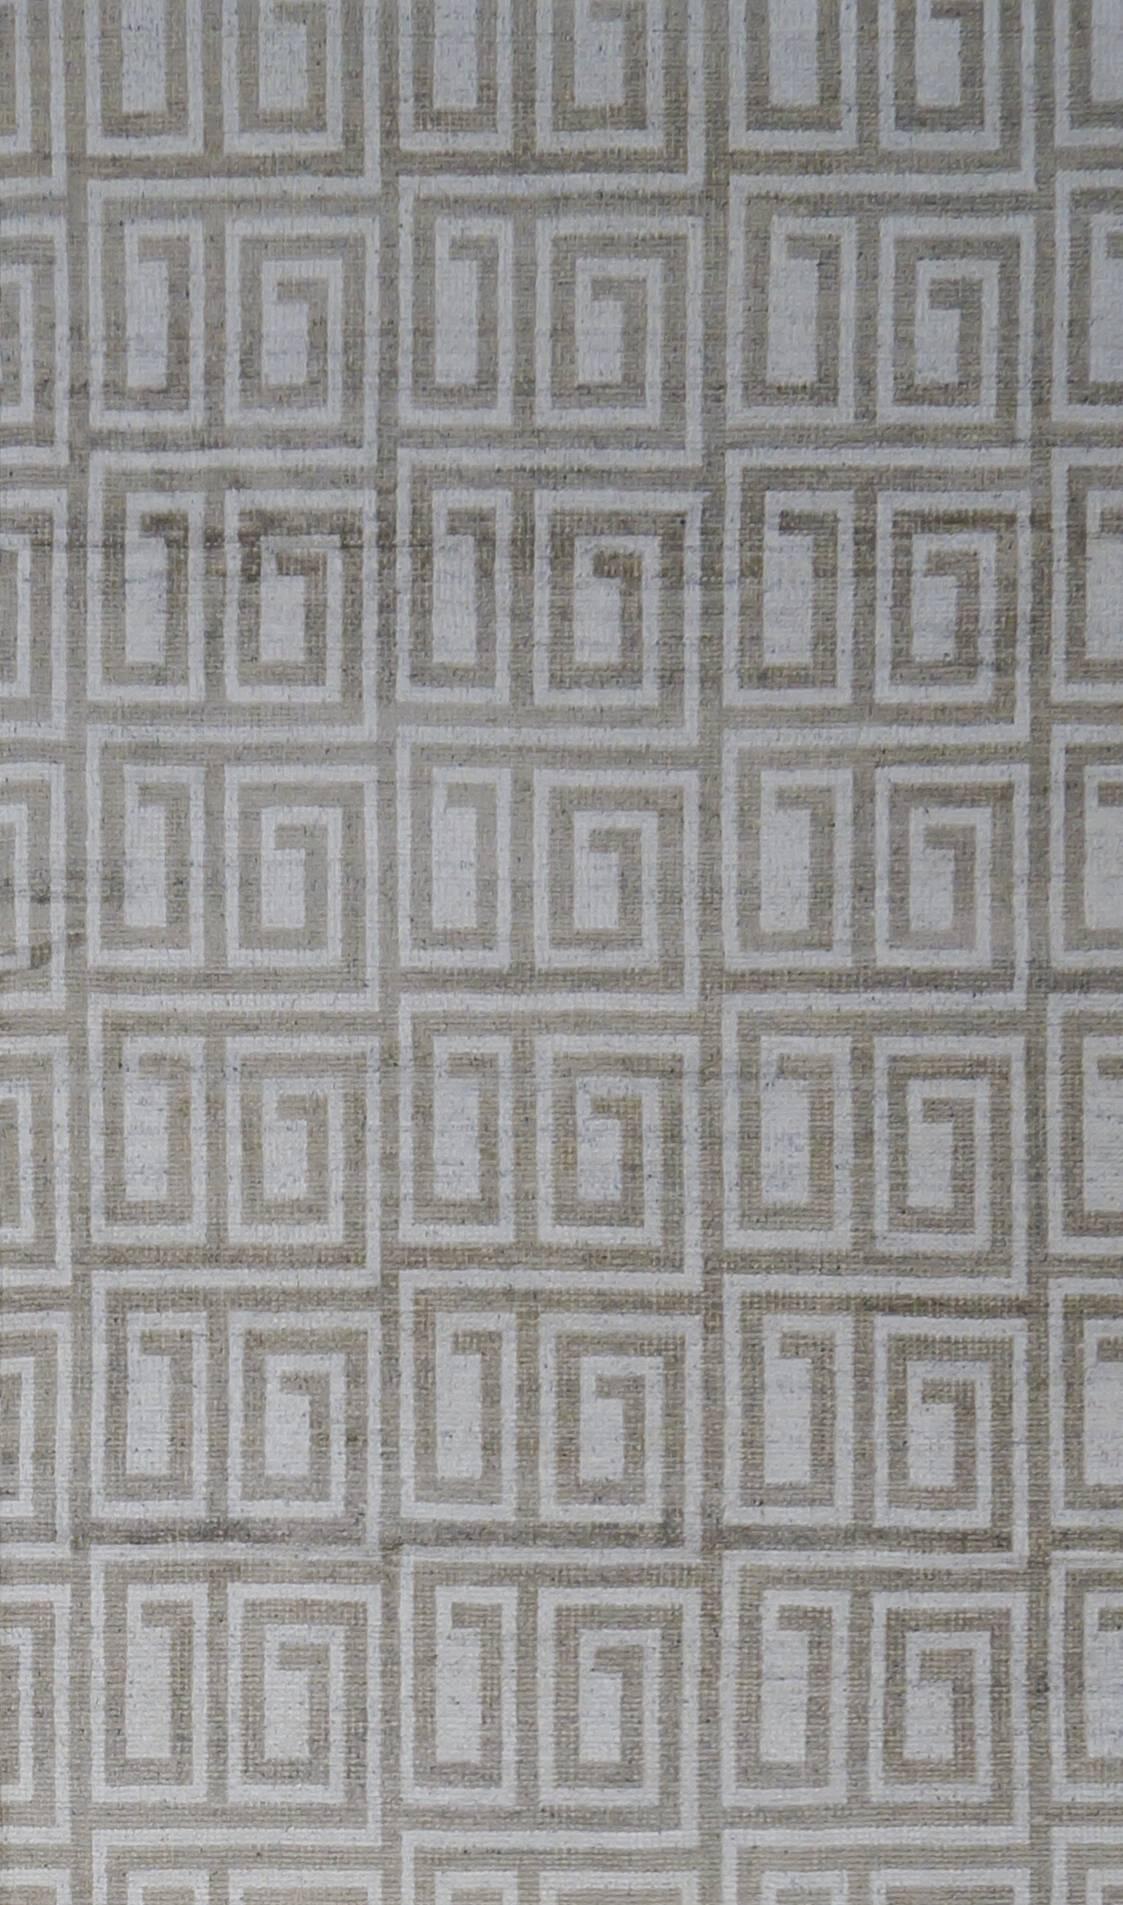 New transitional Greek key Moroccan style woven oriental rug. Woven in India with grey and white shades. The pile has been sheared low and the white accents are woven with silk.
Measures: 12.1 x 17.9.